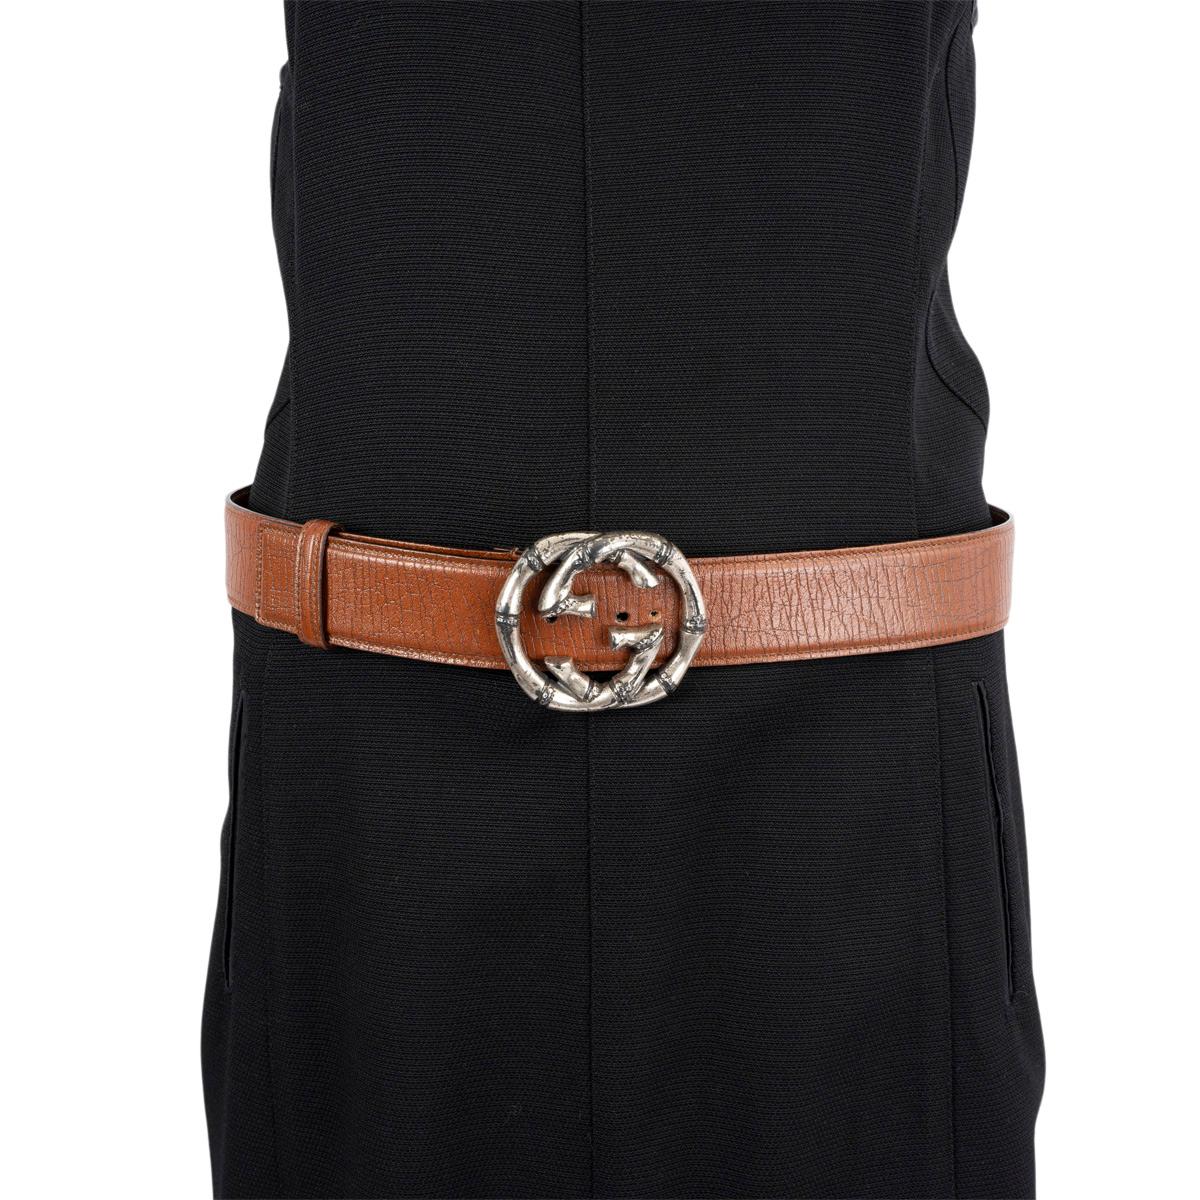 100% authentic Gucci belt in brown textured leather with antique silver GG bamboo buckle.Has been worn and an extra hole got added. Overall in excellent condition. 

Measurements
Model	114868 212956
Tag Size	85
Width	4cm (1.6in)
Fits	82cm (32in) to